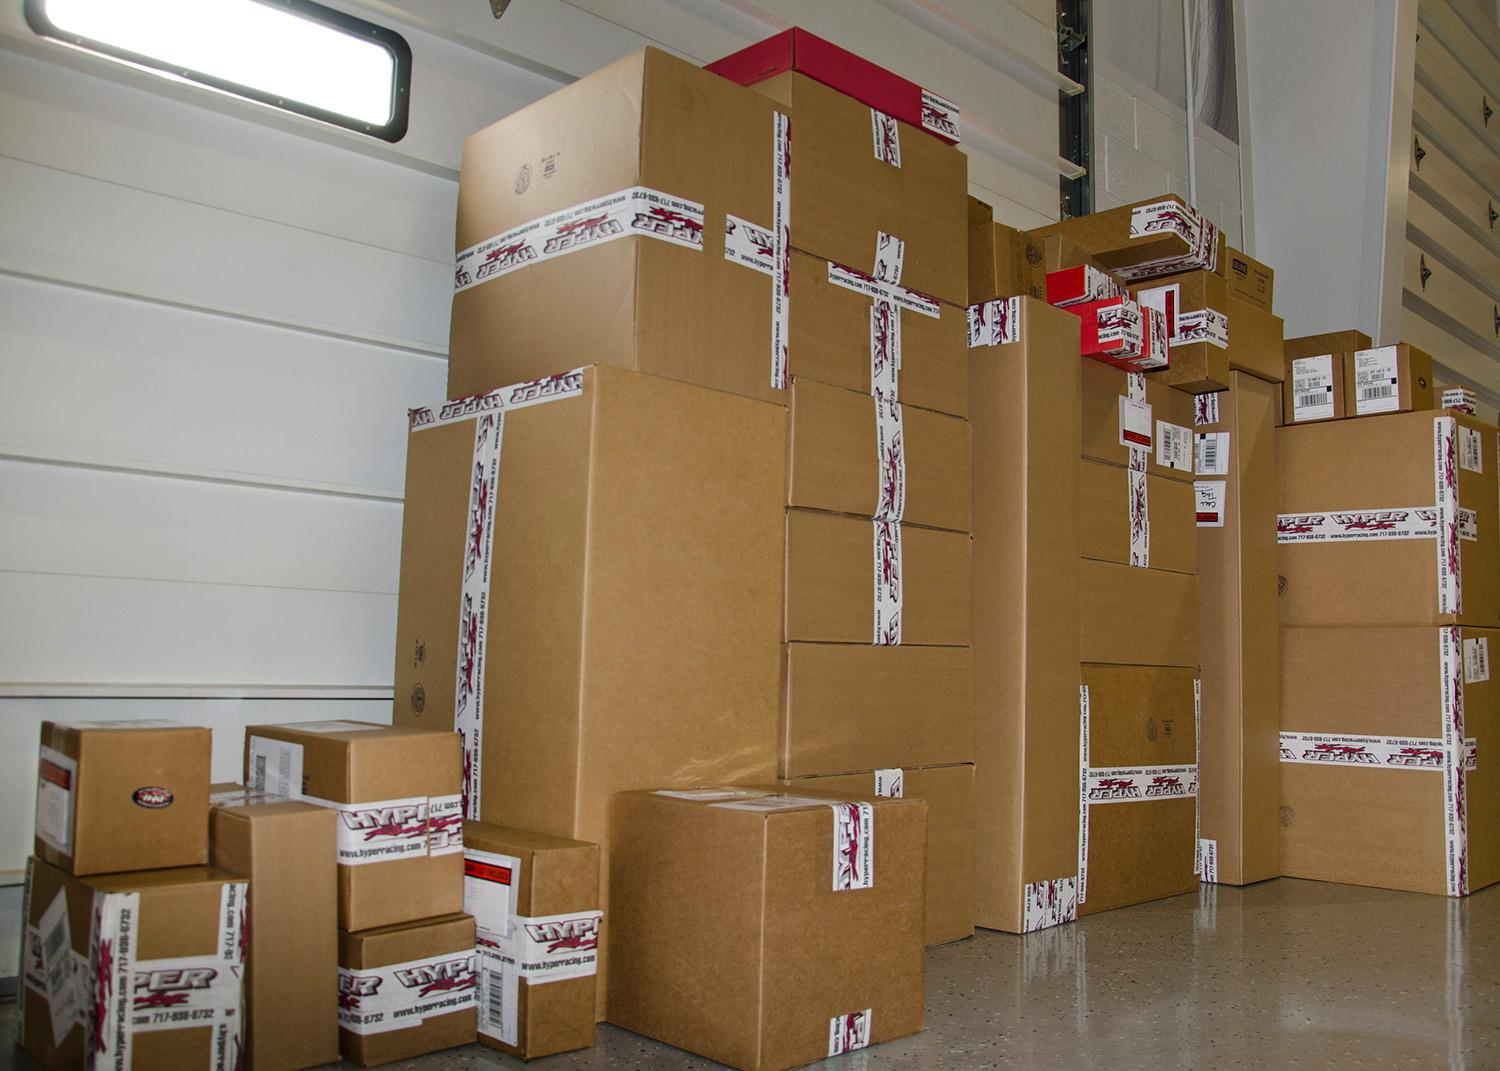 We have pickups from UPS, Postal, and FedEx. You choose the service that best fits your time frame and budget.